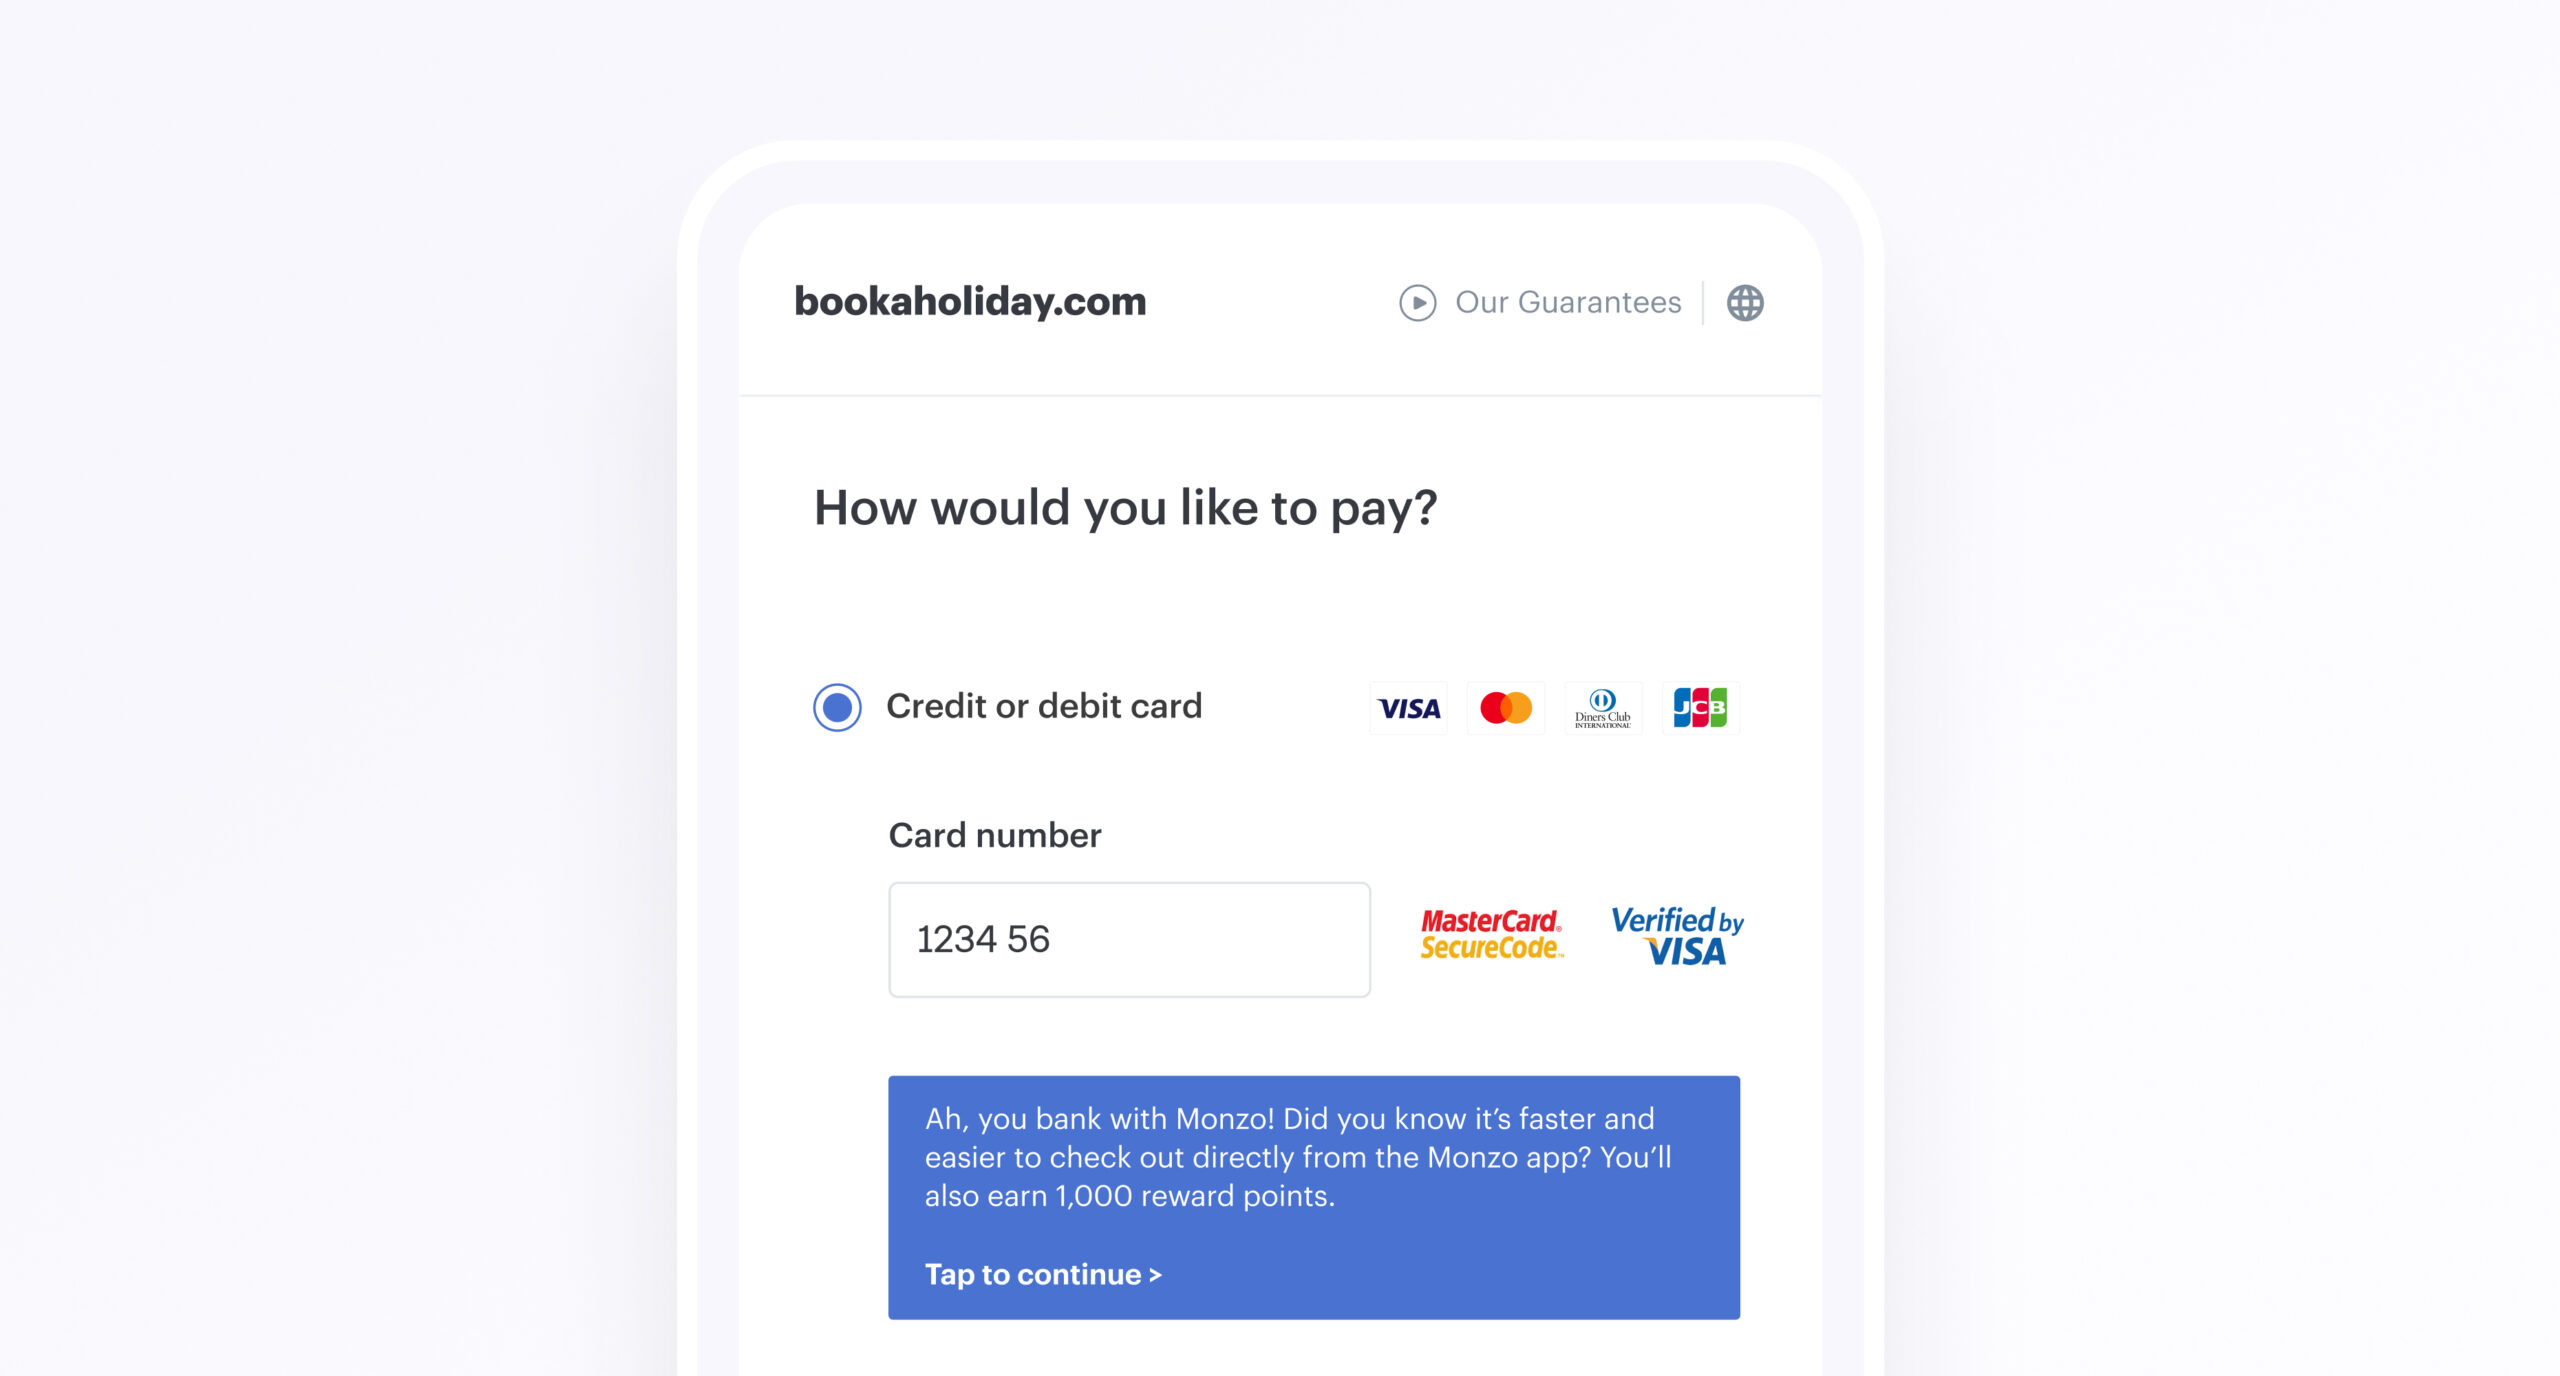 A pop up asks the shopper to consider 'converting' their card payment into an open banking payment